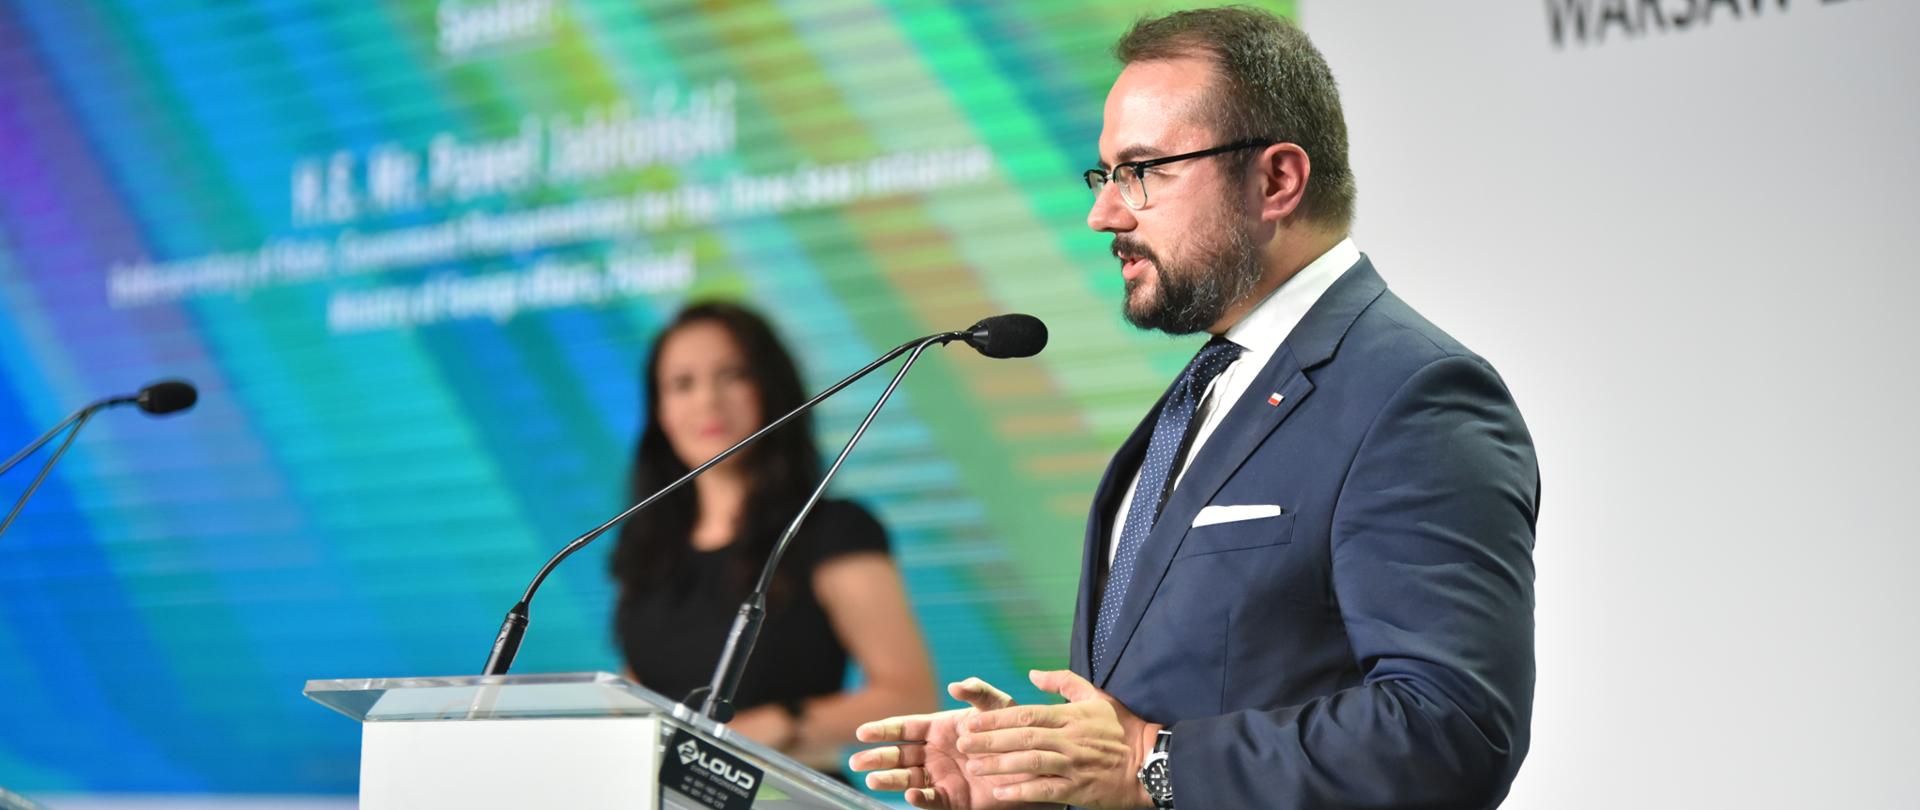 Undersecretary of State at the Ministry of Foreign Affairs, Paweł Jabłoński, speaks during a panel on the Three Seas Initiative